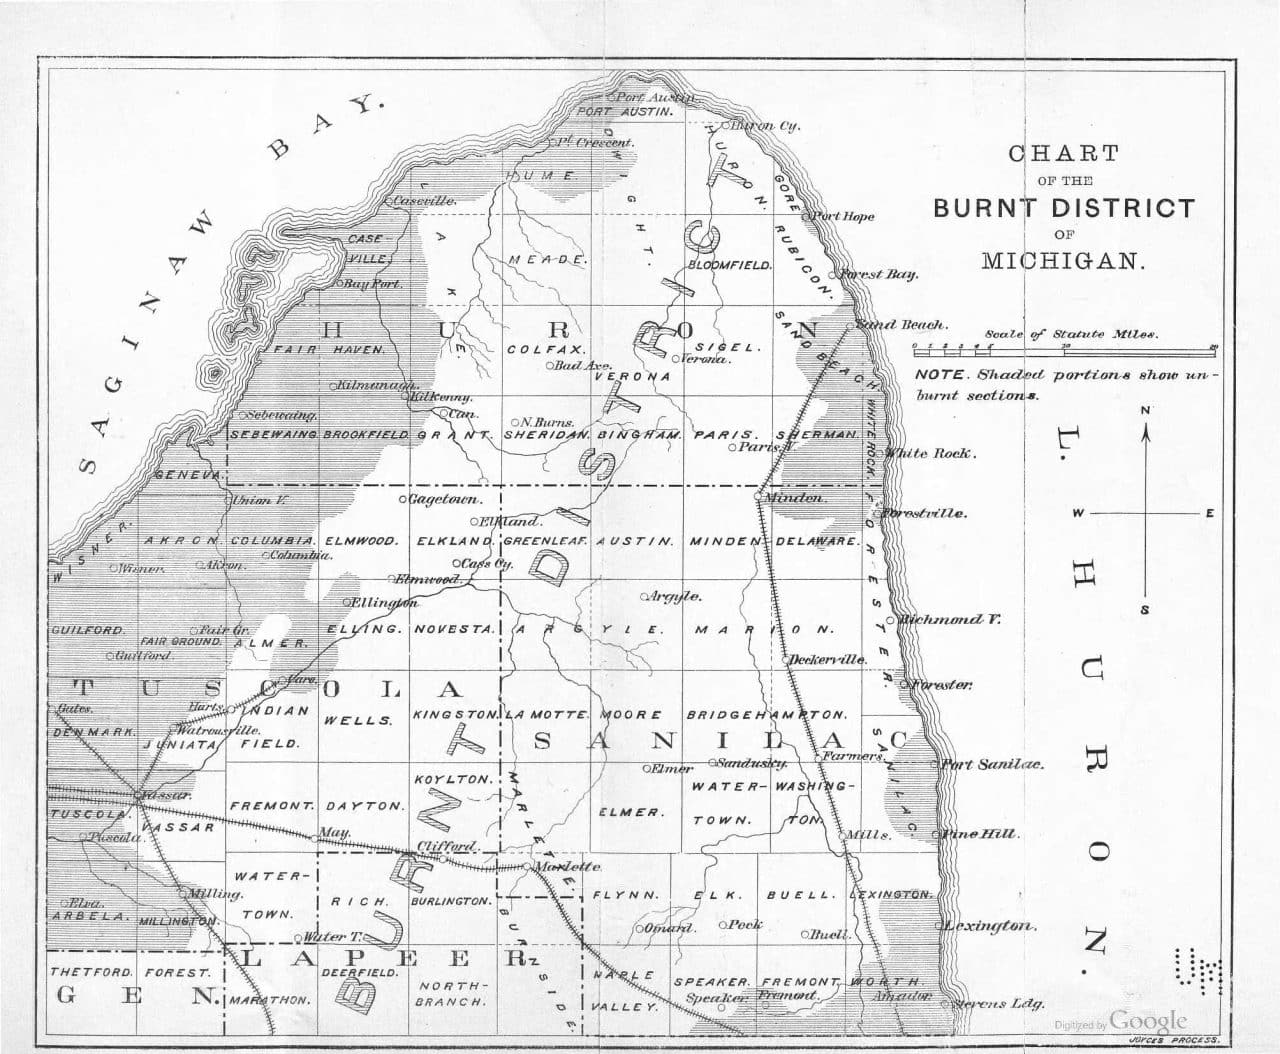 Chart of the Burnt District - From the Report on the Michigan Forest Fires of 1881 - William O. Bailey